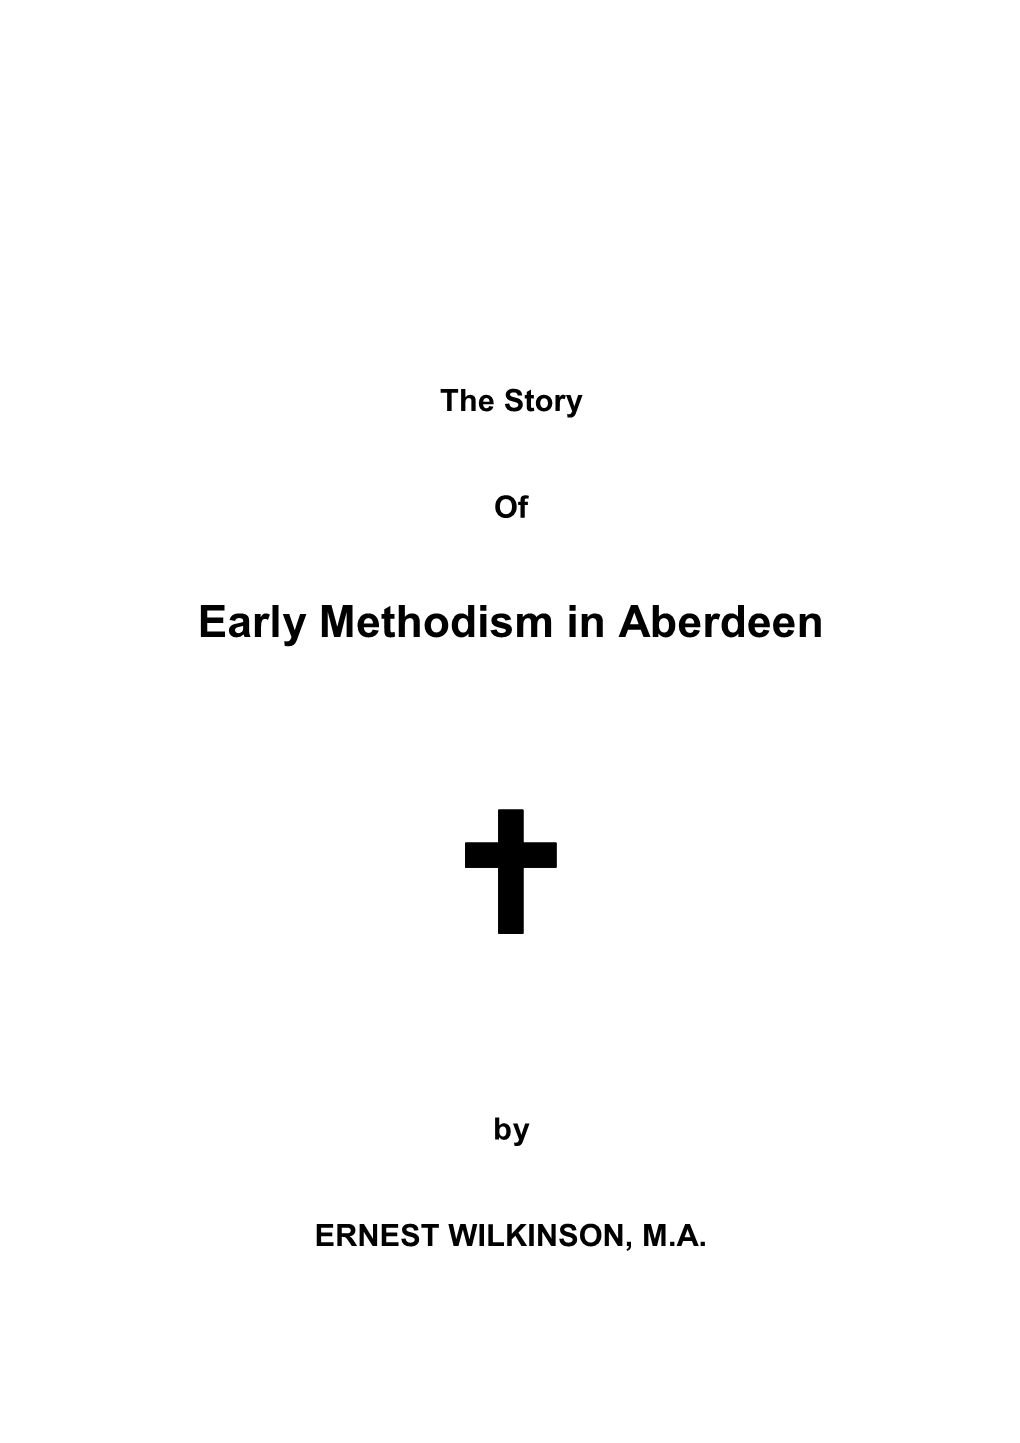 Early Methodism in Aberdeen